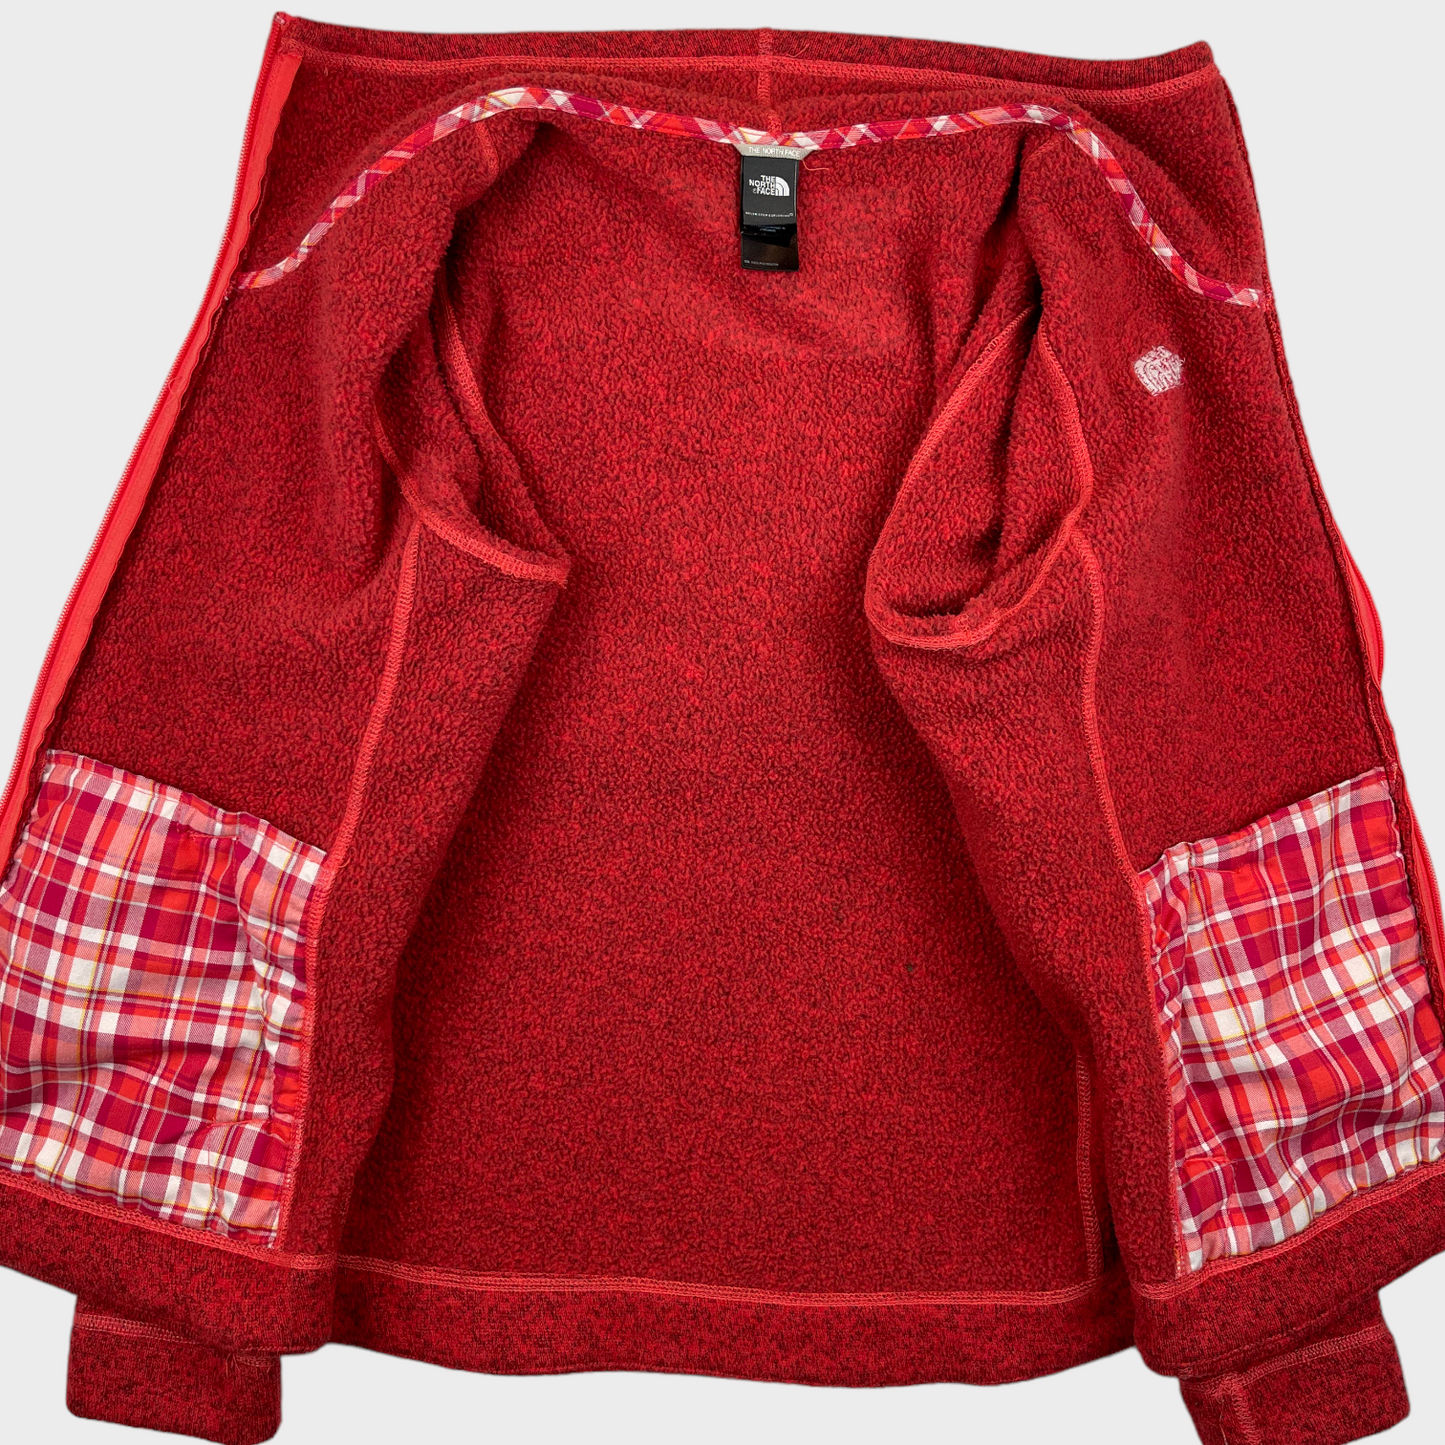 The North Face Maggy Zip Sweater Fleece Jacket Red Plaid Pockets Size Women's Large